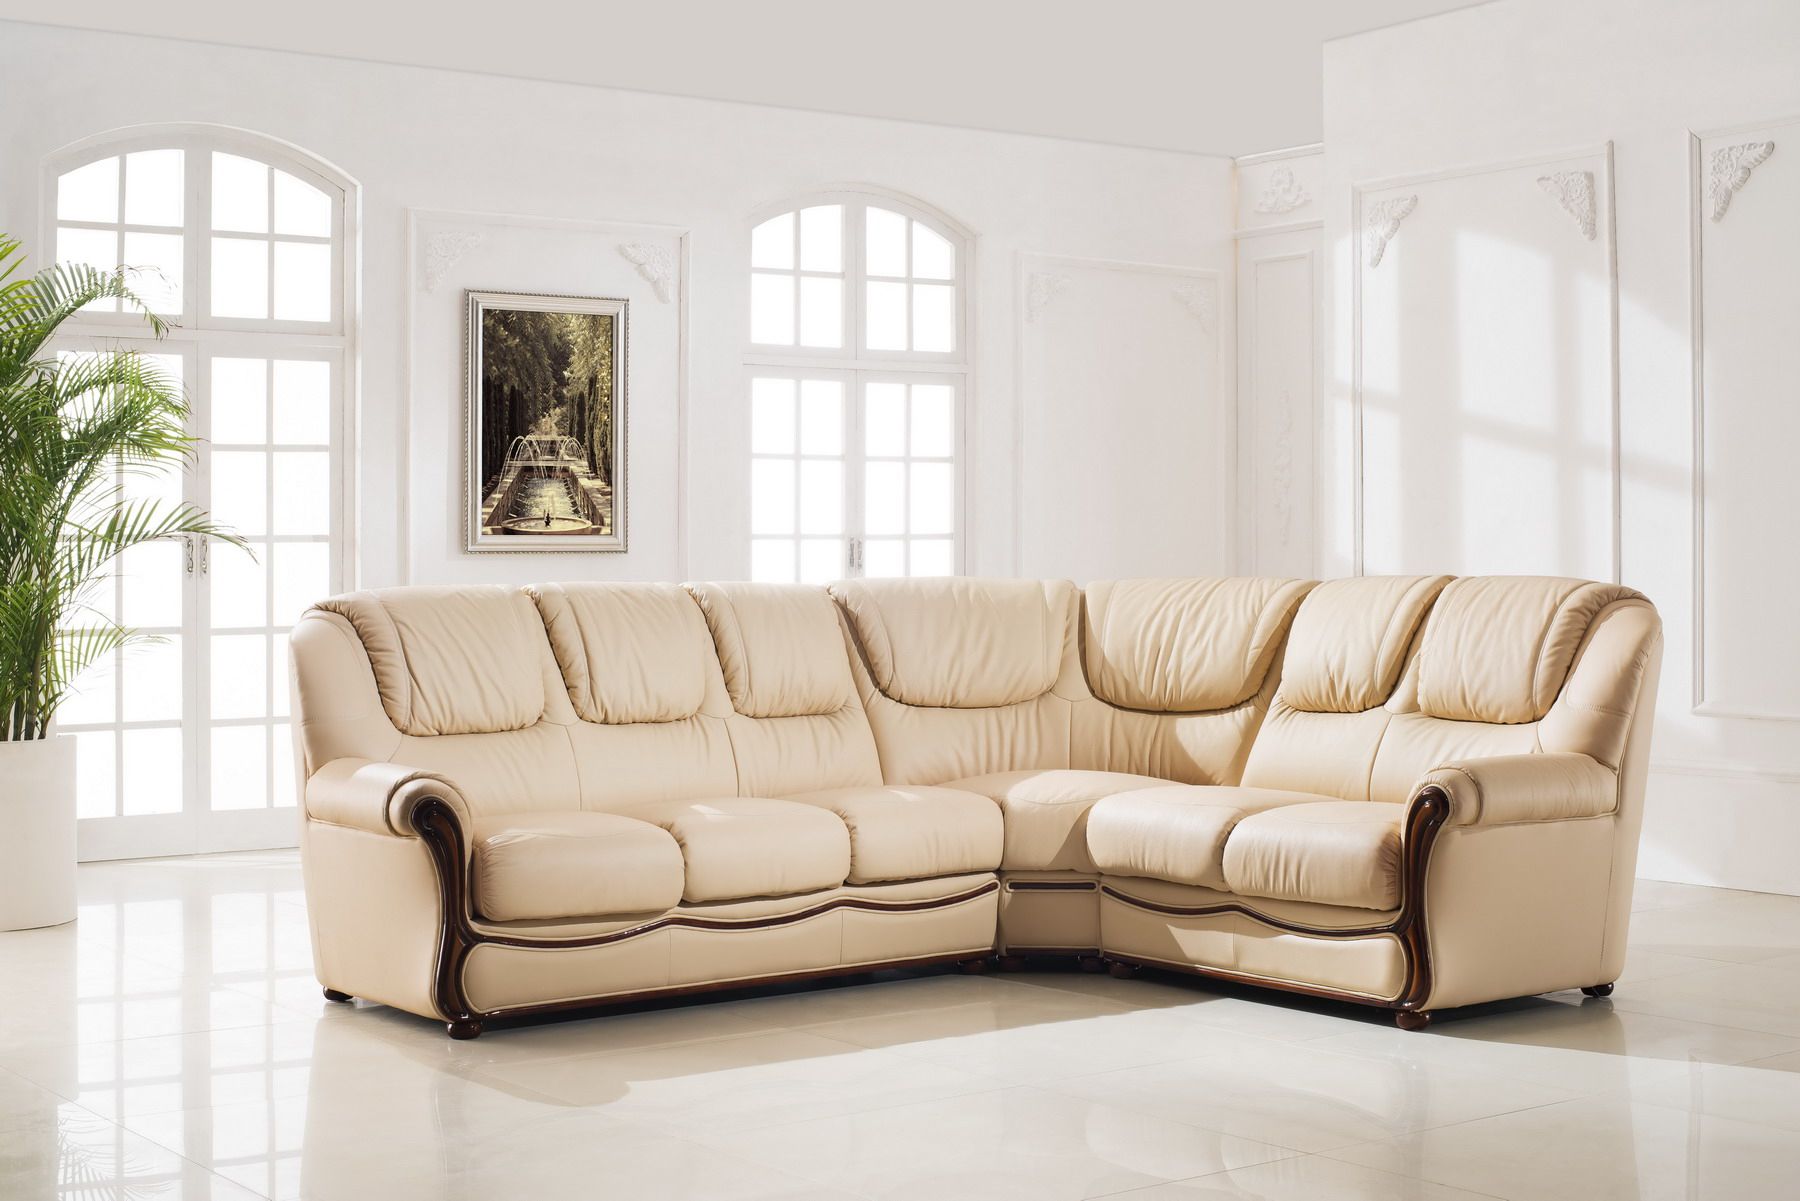 Esf 102 Top Grain Italian Leather Sectional W Bed Throughout [%Matilda 100% Top Grain Leather Chaise Sectional Sofas|Matilda 100% Top Grain Leather Chaise Sectional Sofas%] (View 3 of 15)